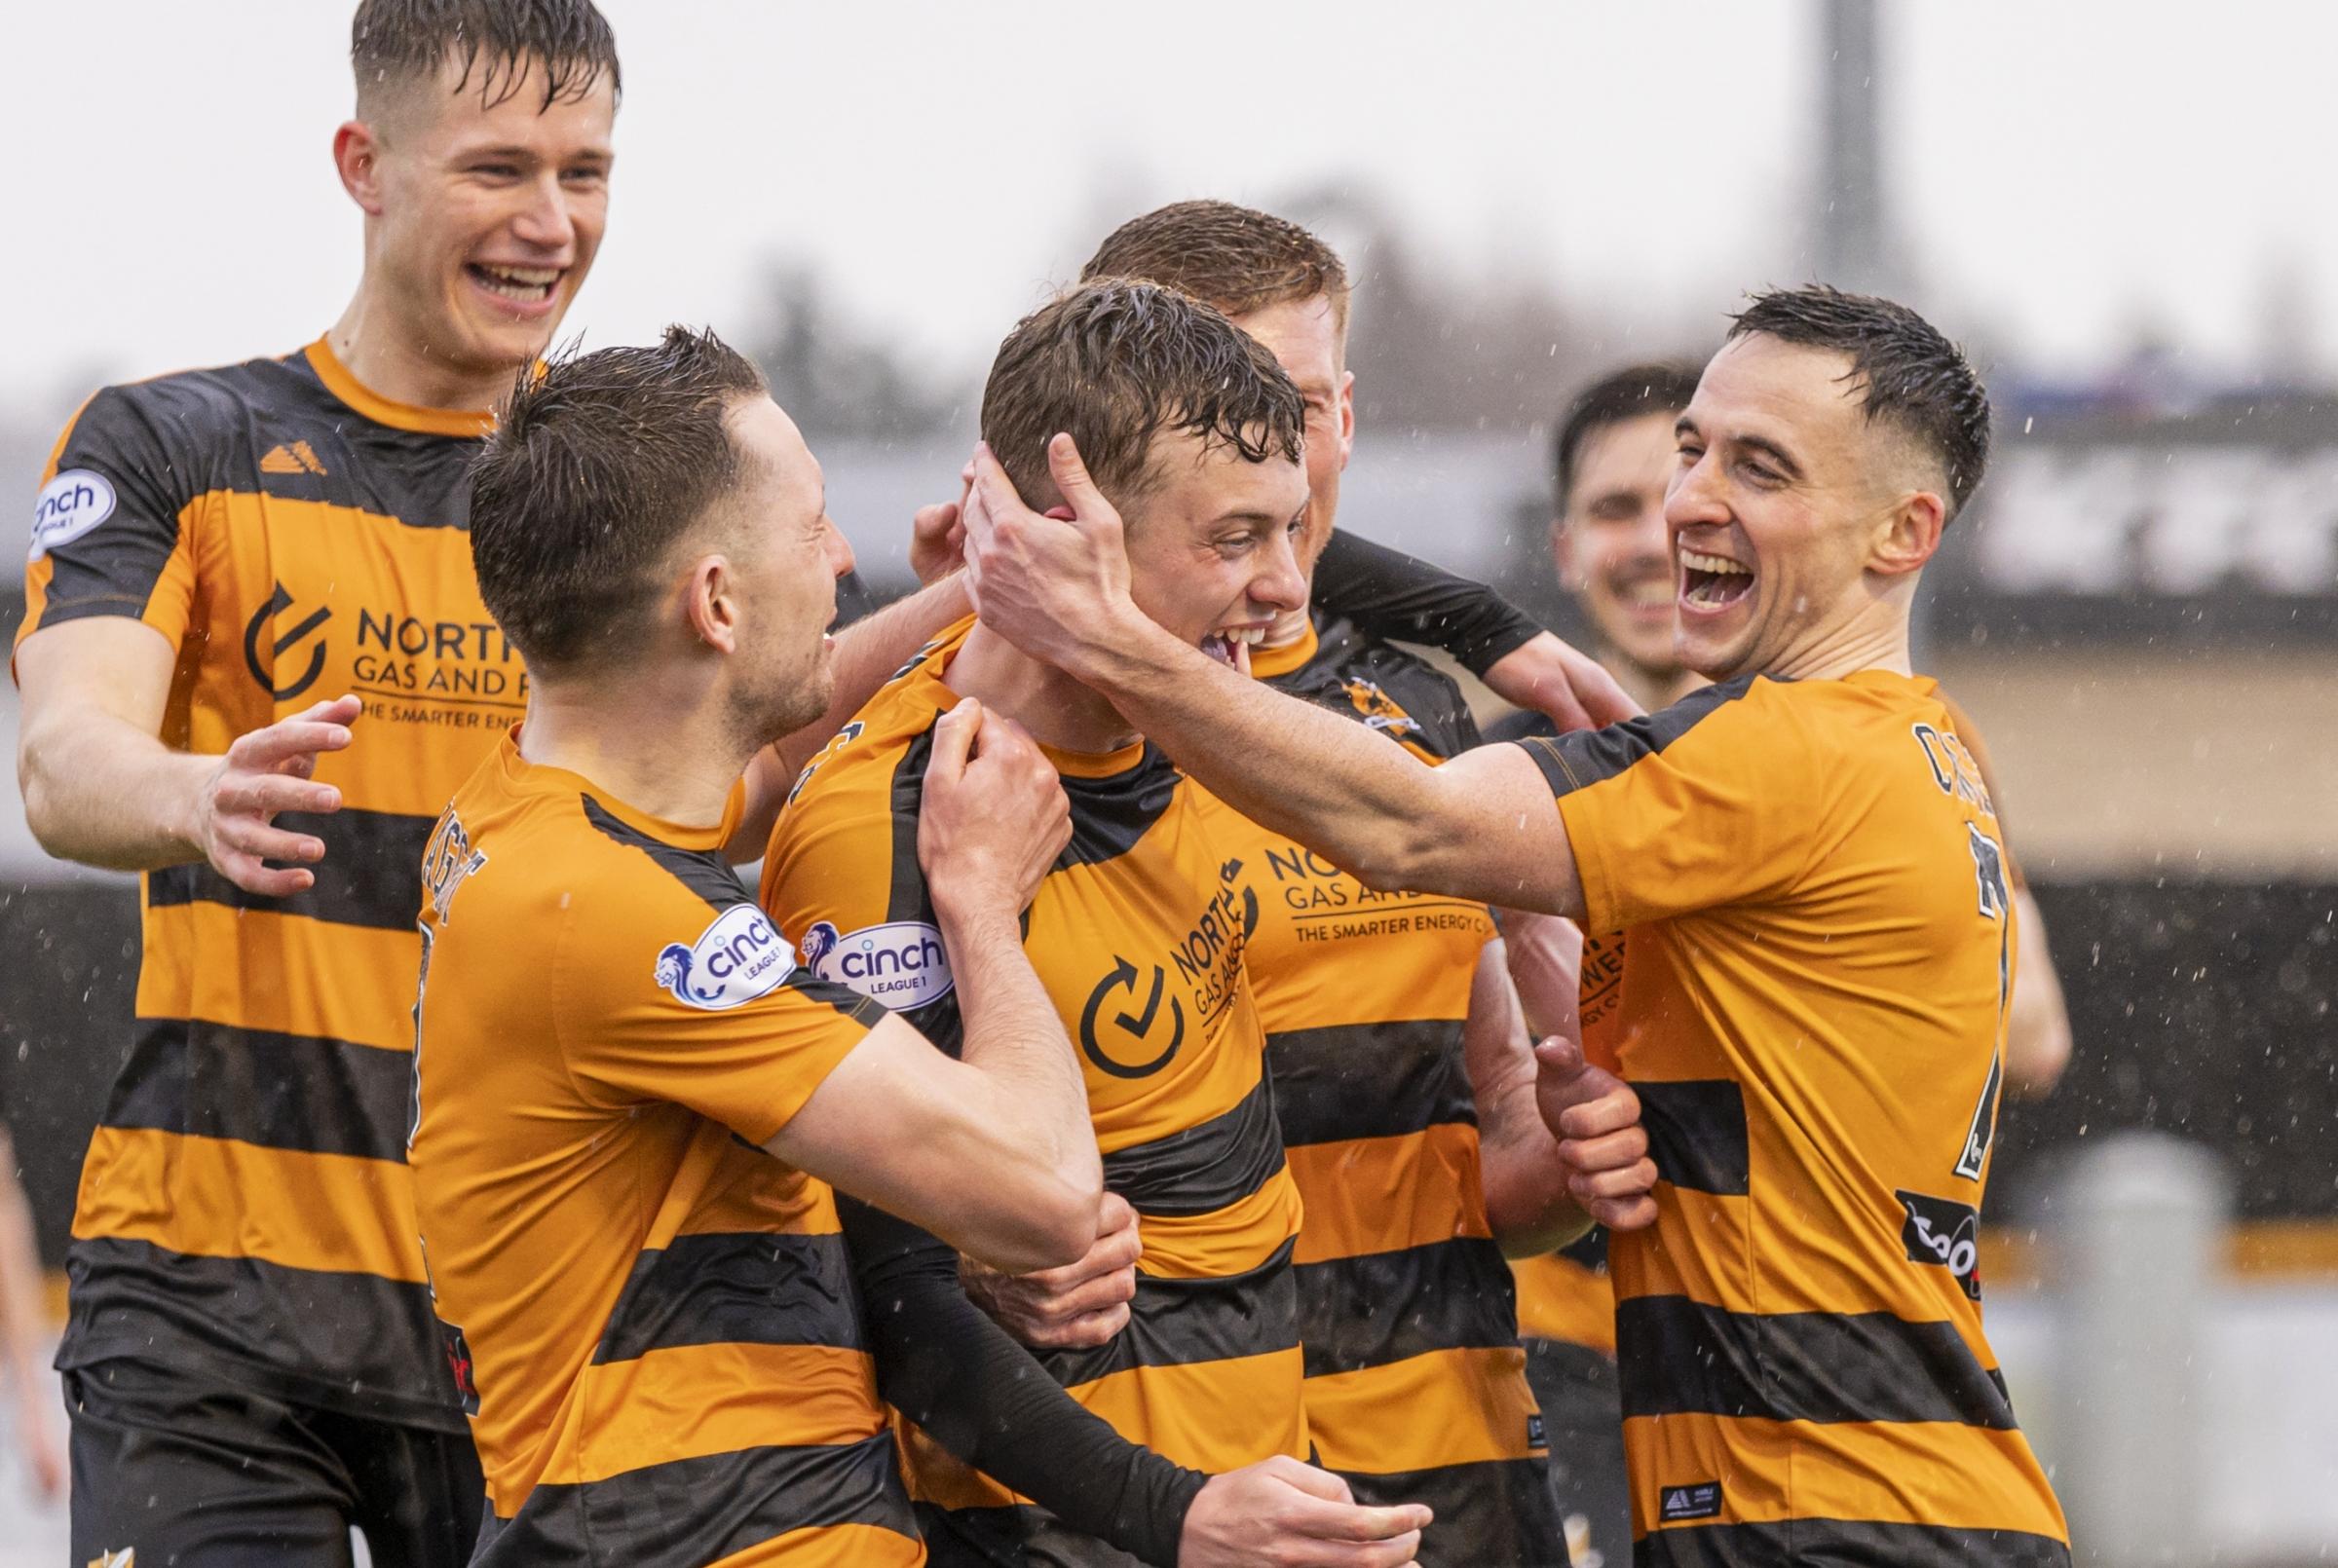 Alloa 3-1 Clyde: Back-to-back league wins for the Wasps